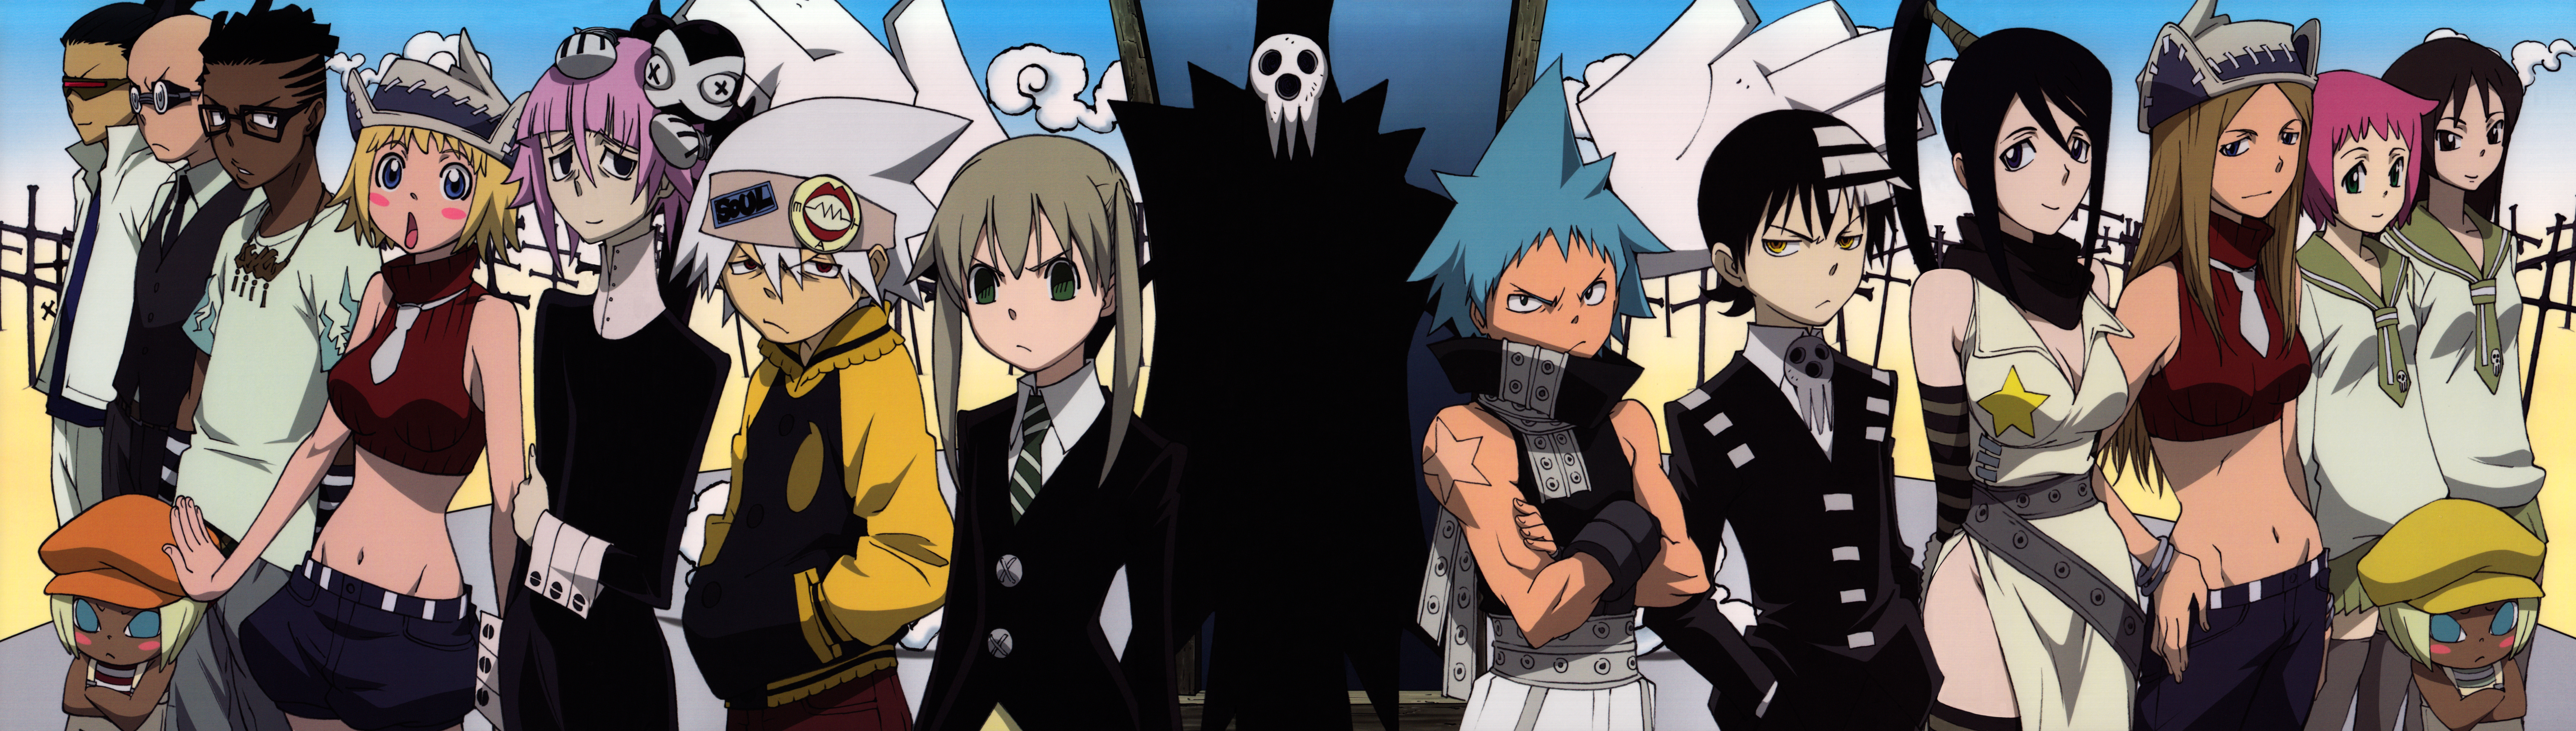 Adult Swim got it right Soul Eater is on the air! Chibichan's Anime